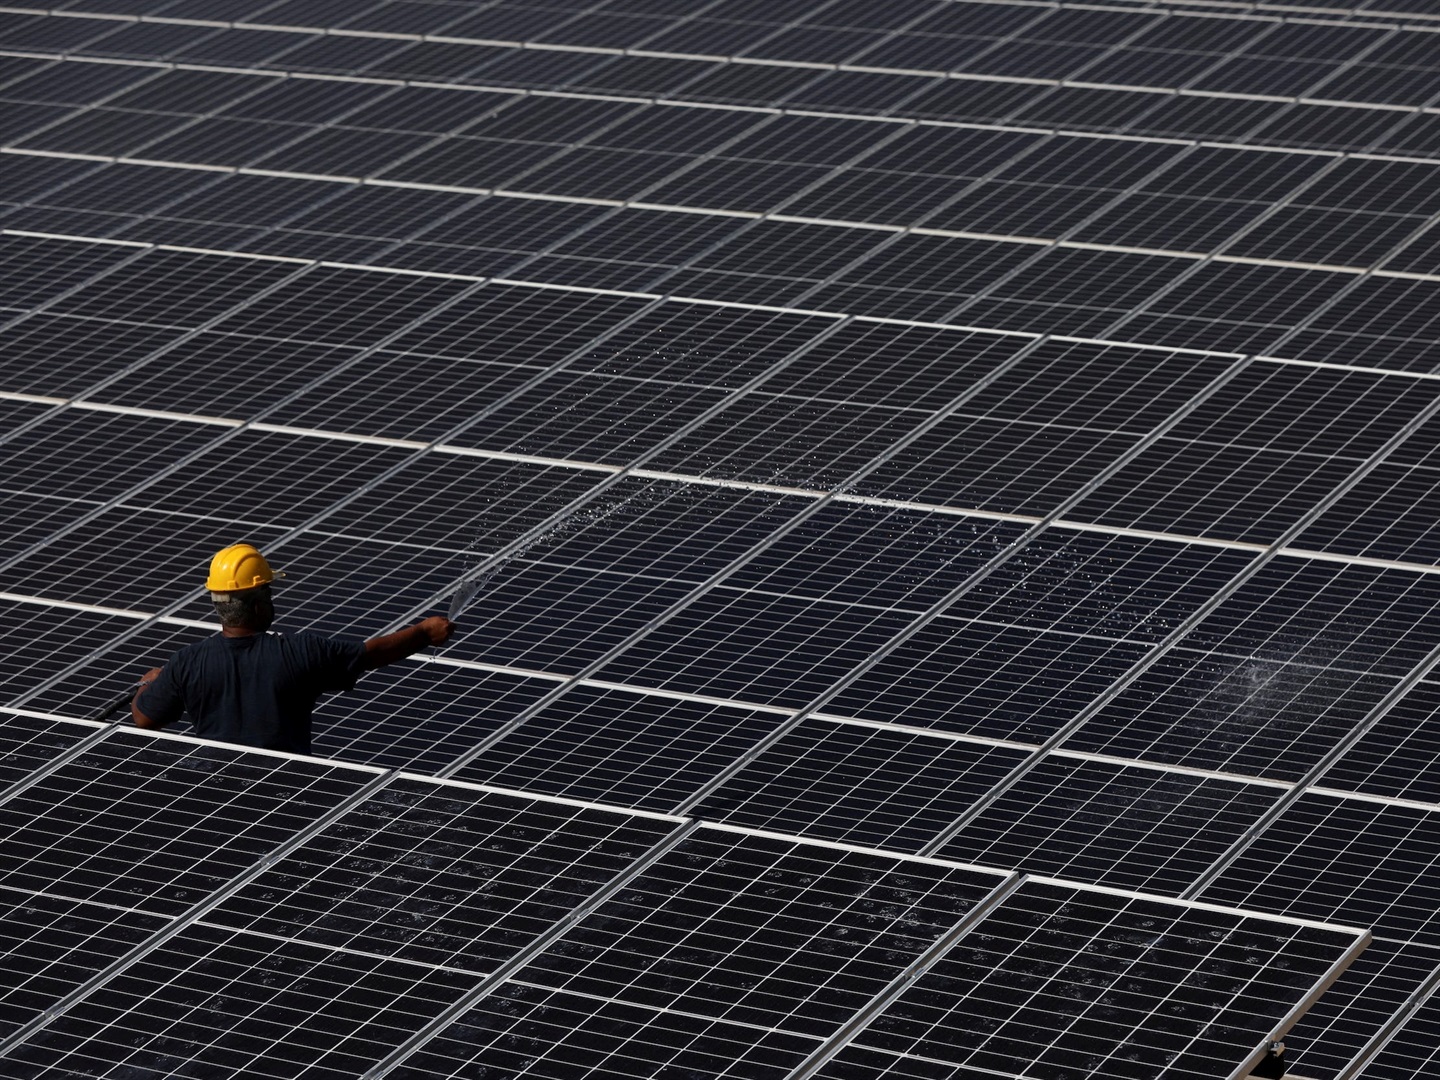 An employee works among solar panels at Bemol Solar plant outside Manaus, Amazonas state, Brazil, on August 23, 2021. Bruno Kelly/Reuters